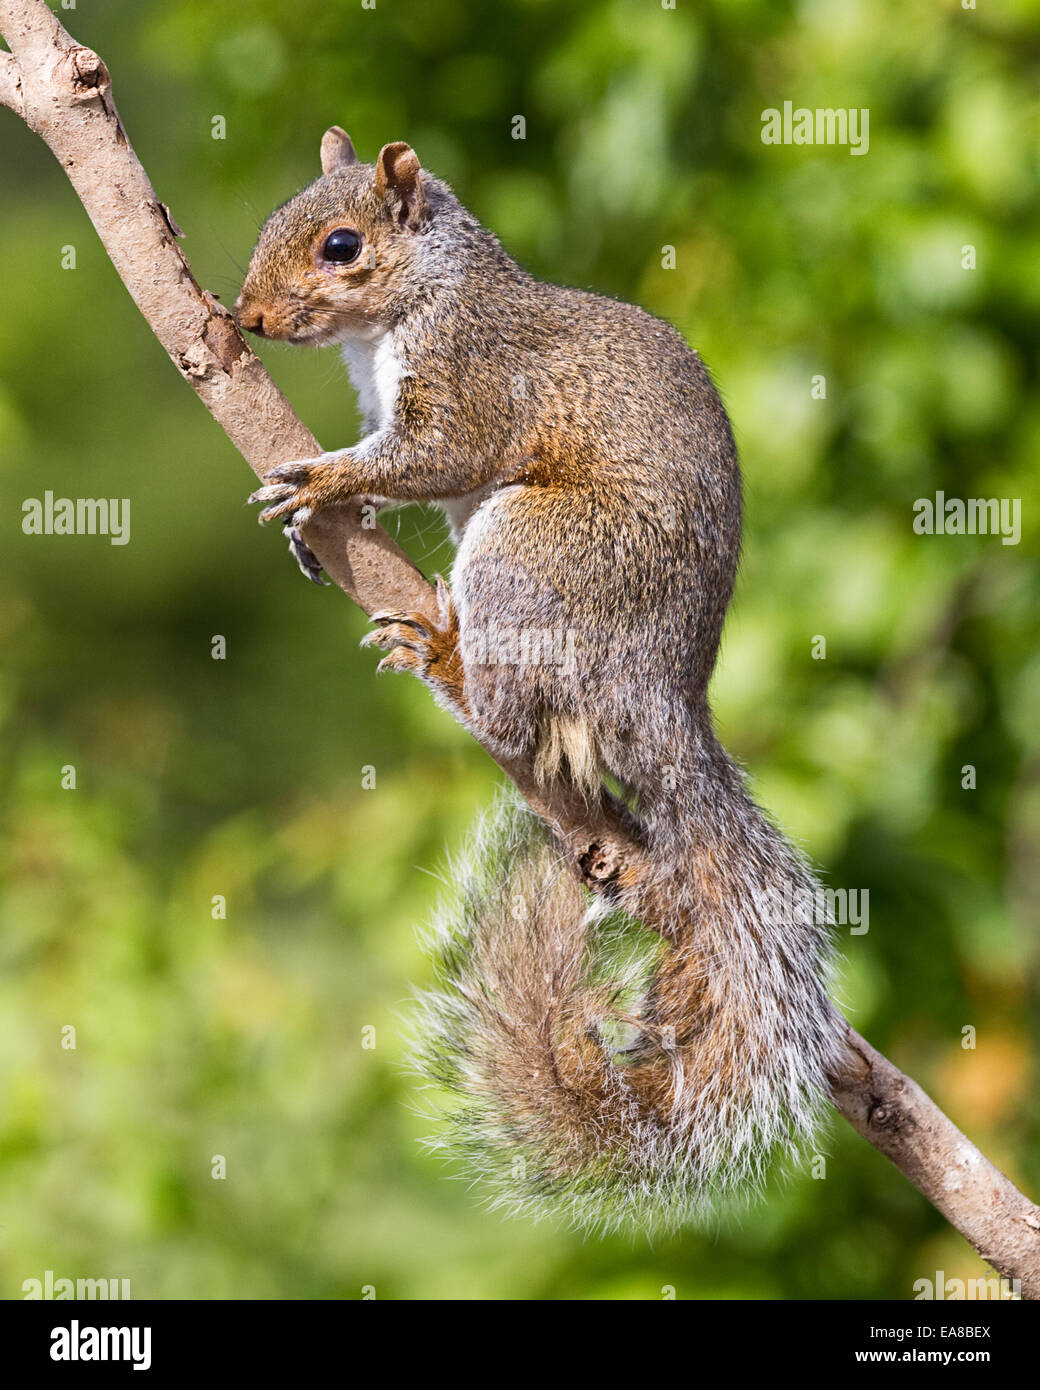 Vertical shot of a grey gray squirrel on a natural branch against a natural green background.  The squirrel is looking at the ca Stock Photo